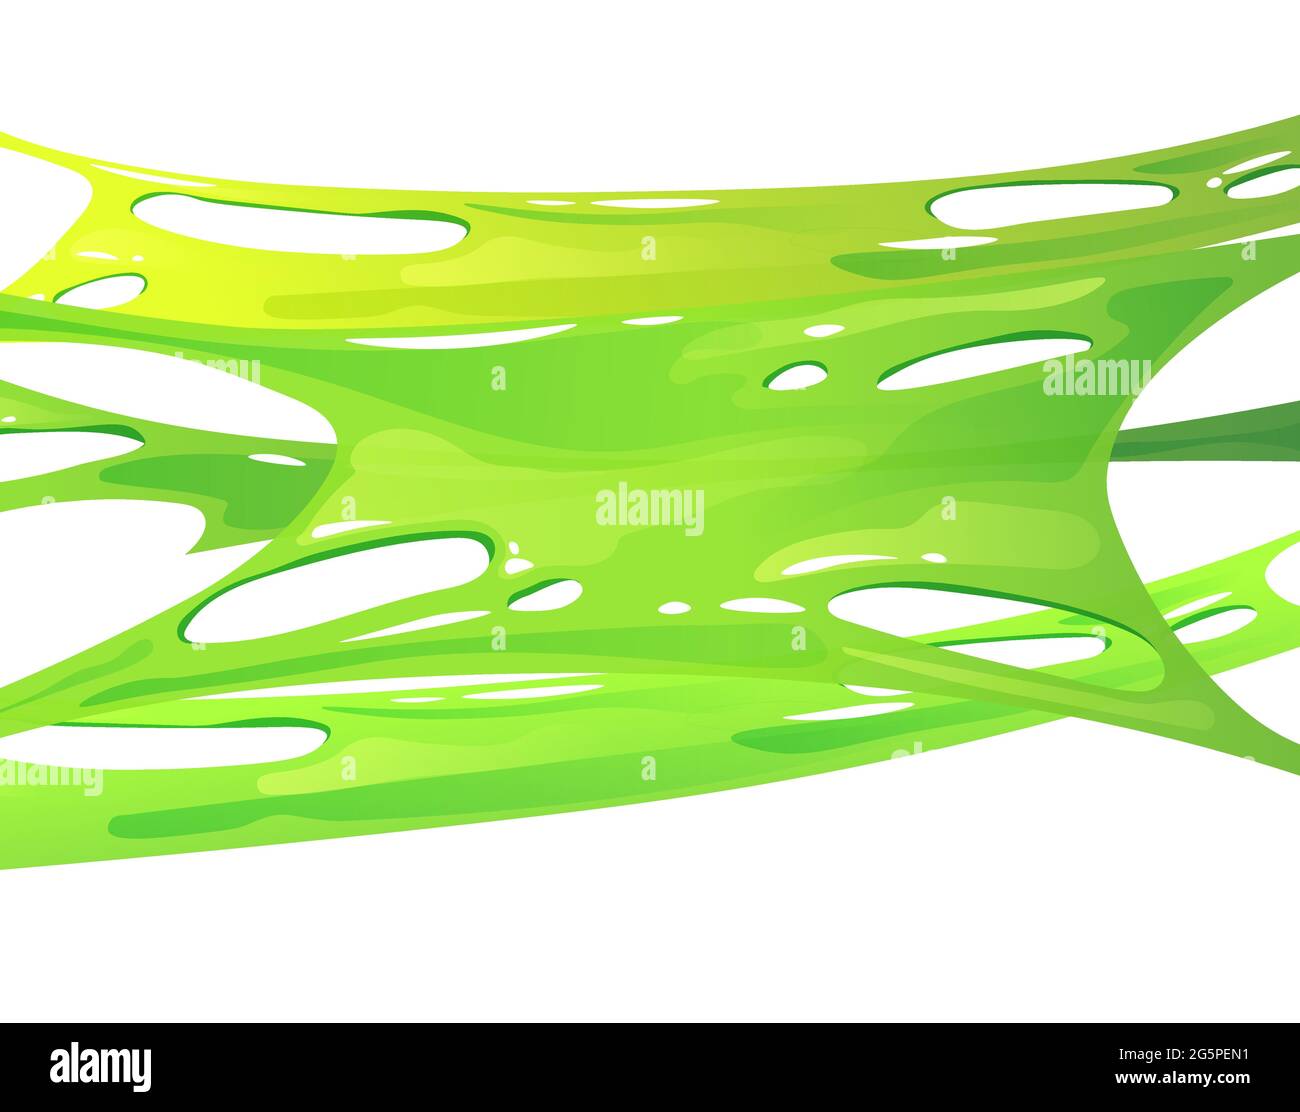 Stretched green slime. Kids' sensory toy. Cartoon vector illustration. Stock Vector